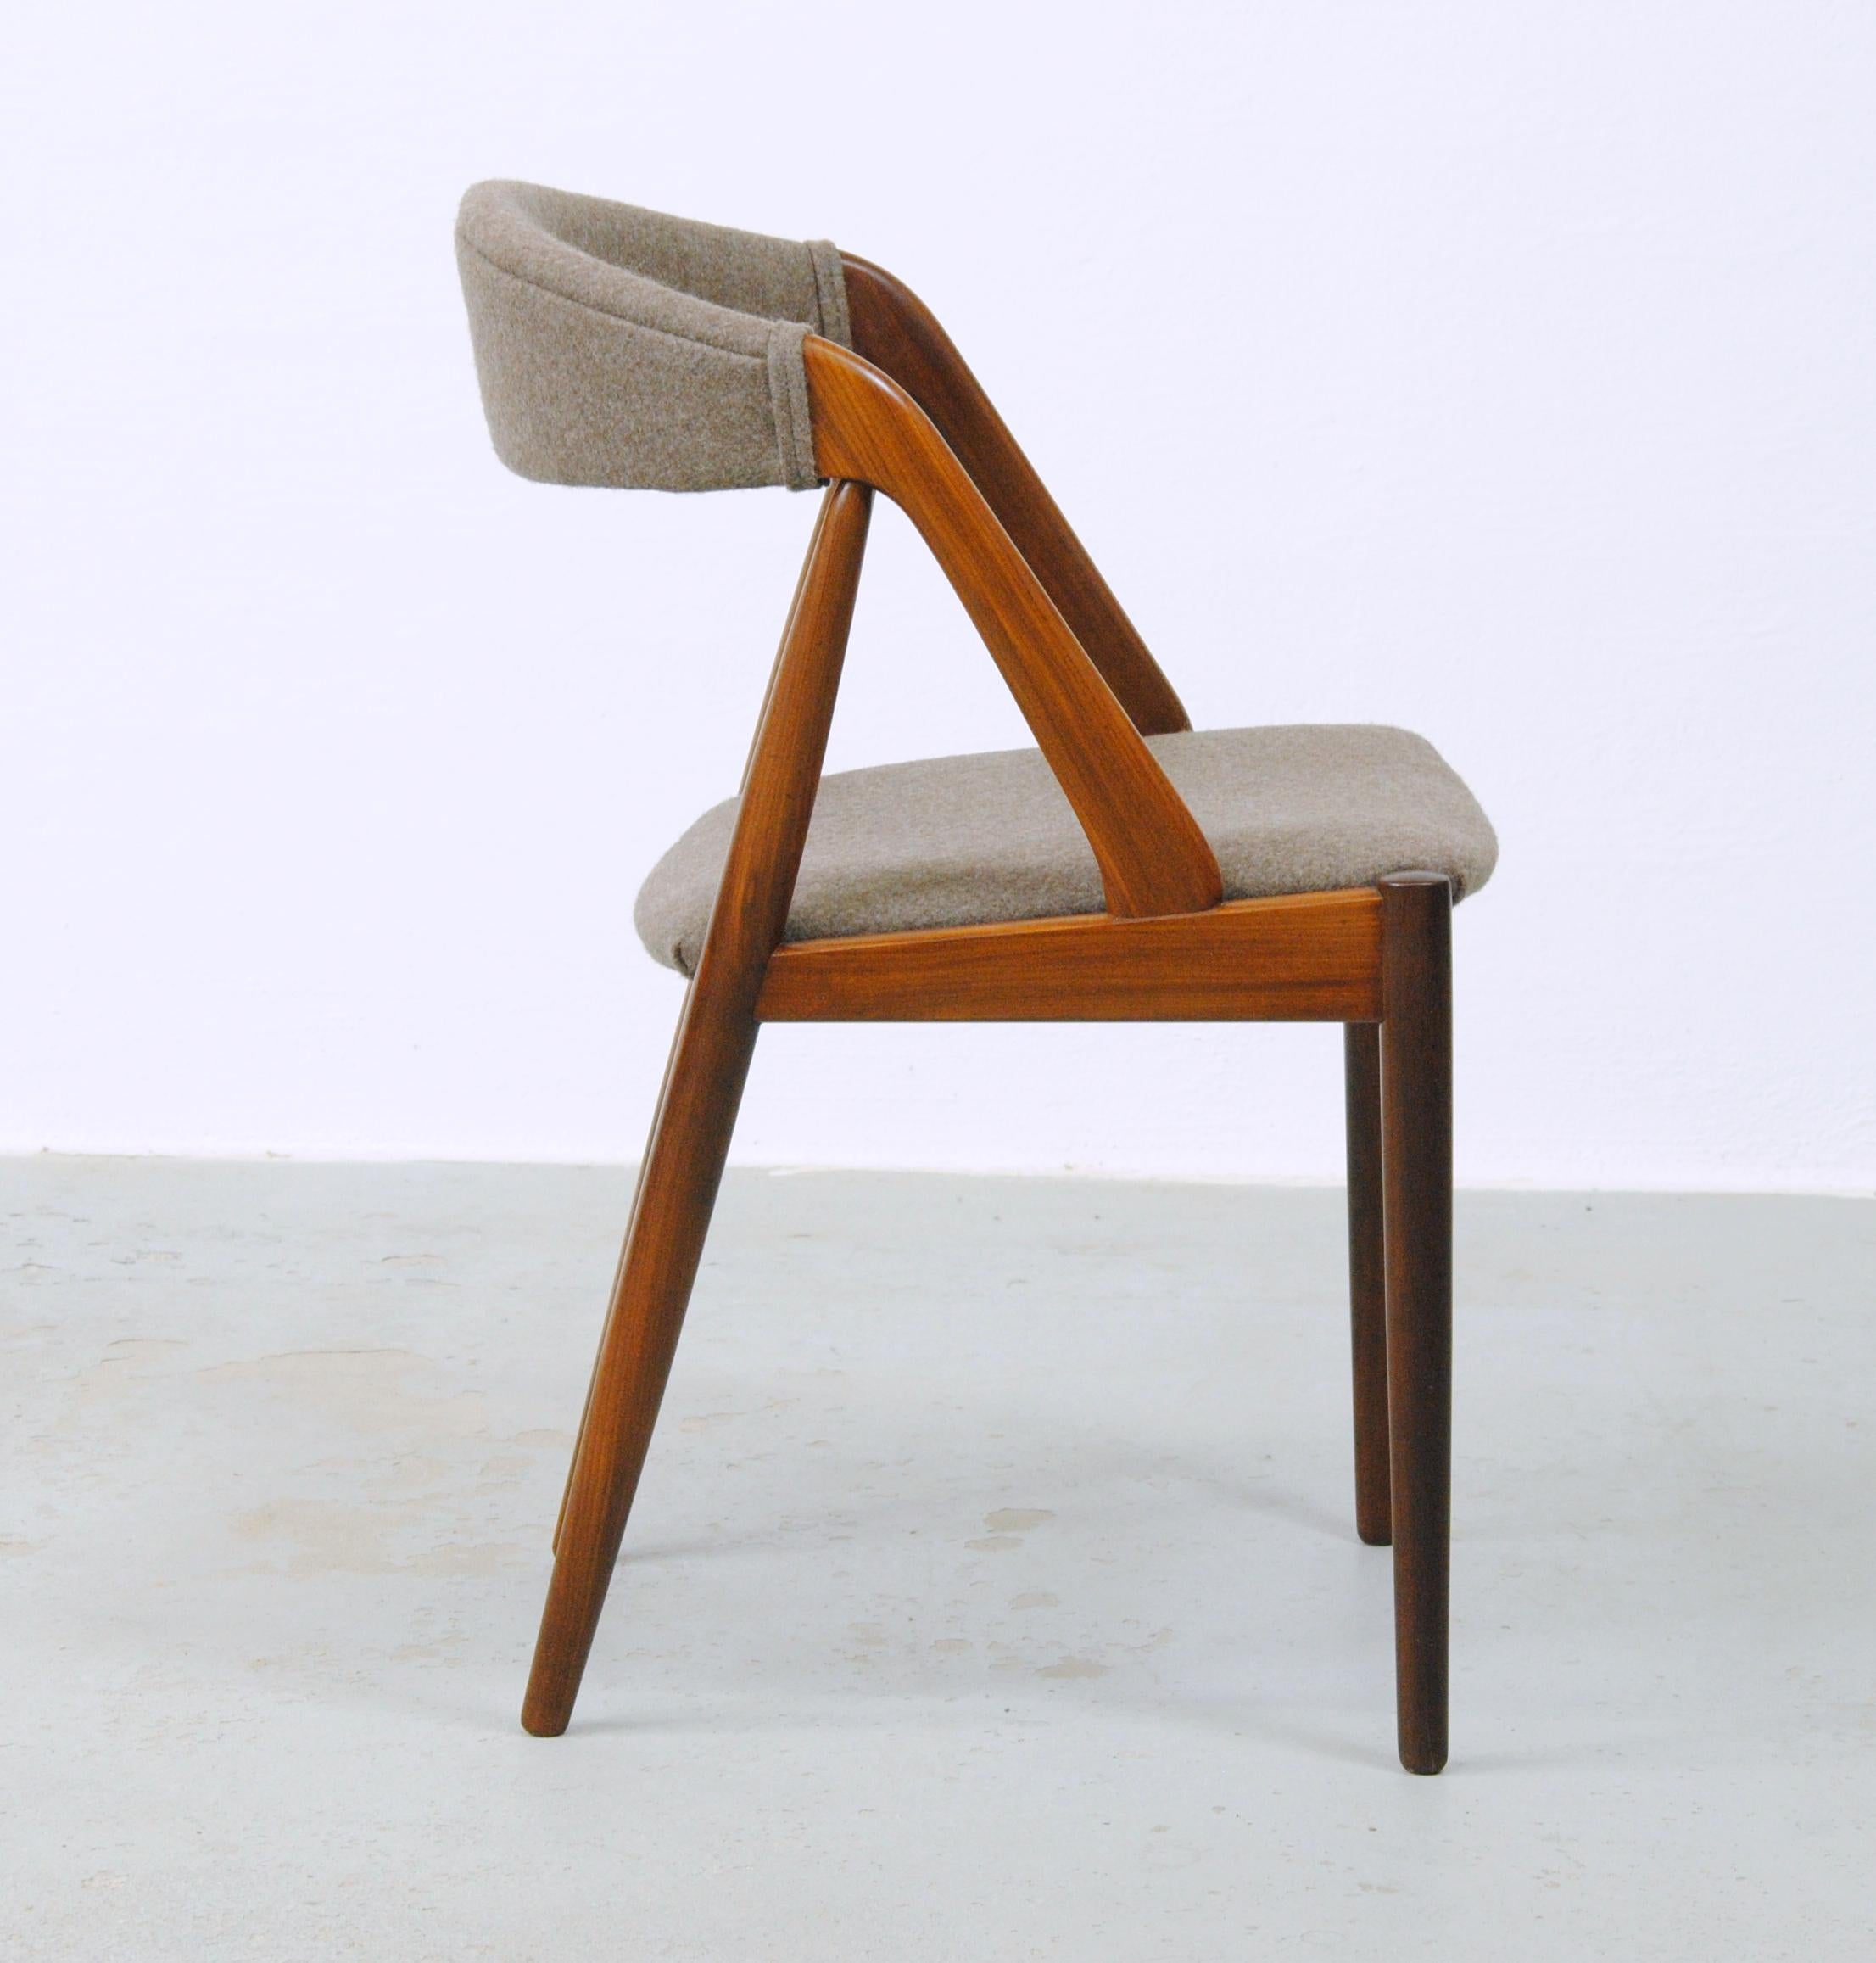 Six Fully Restored Kai Kristiansen Teak Dining Chairs Custom Upholstery Included In Good Condition For Sale In Knebel, DK